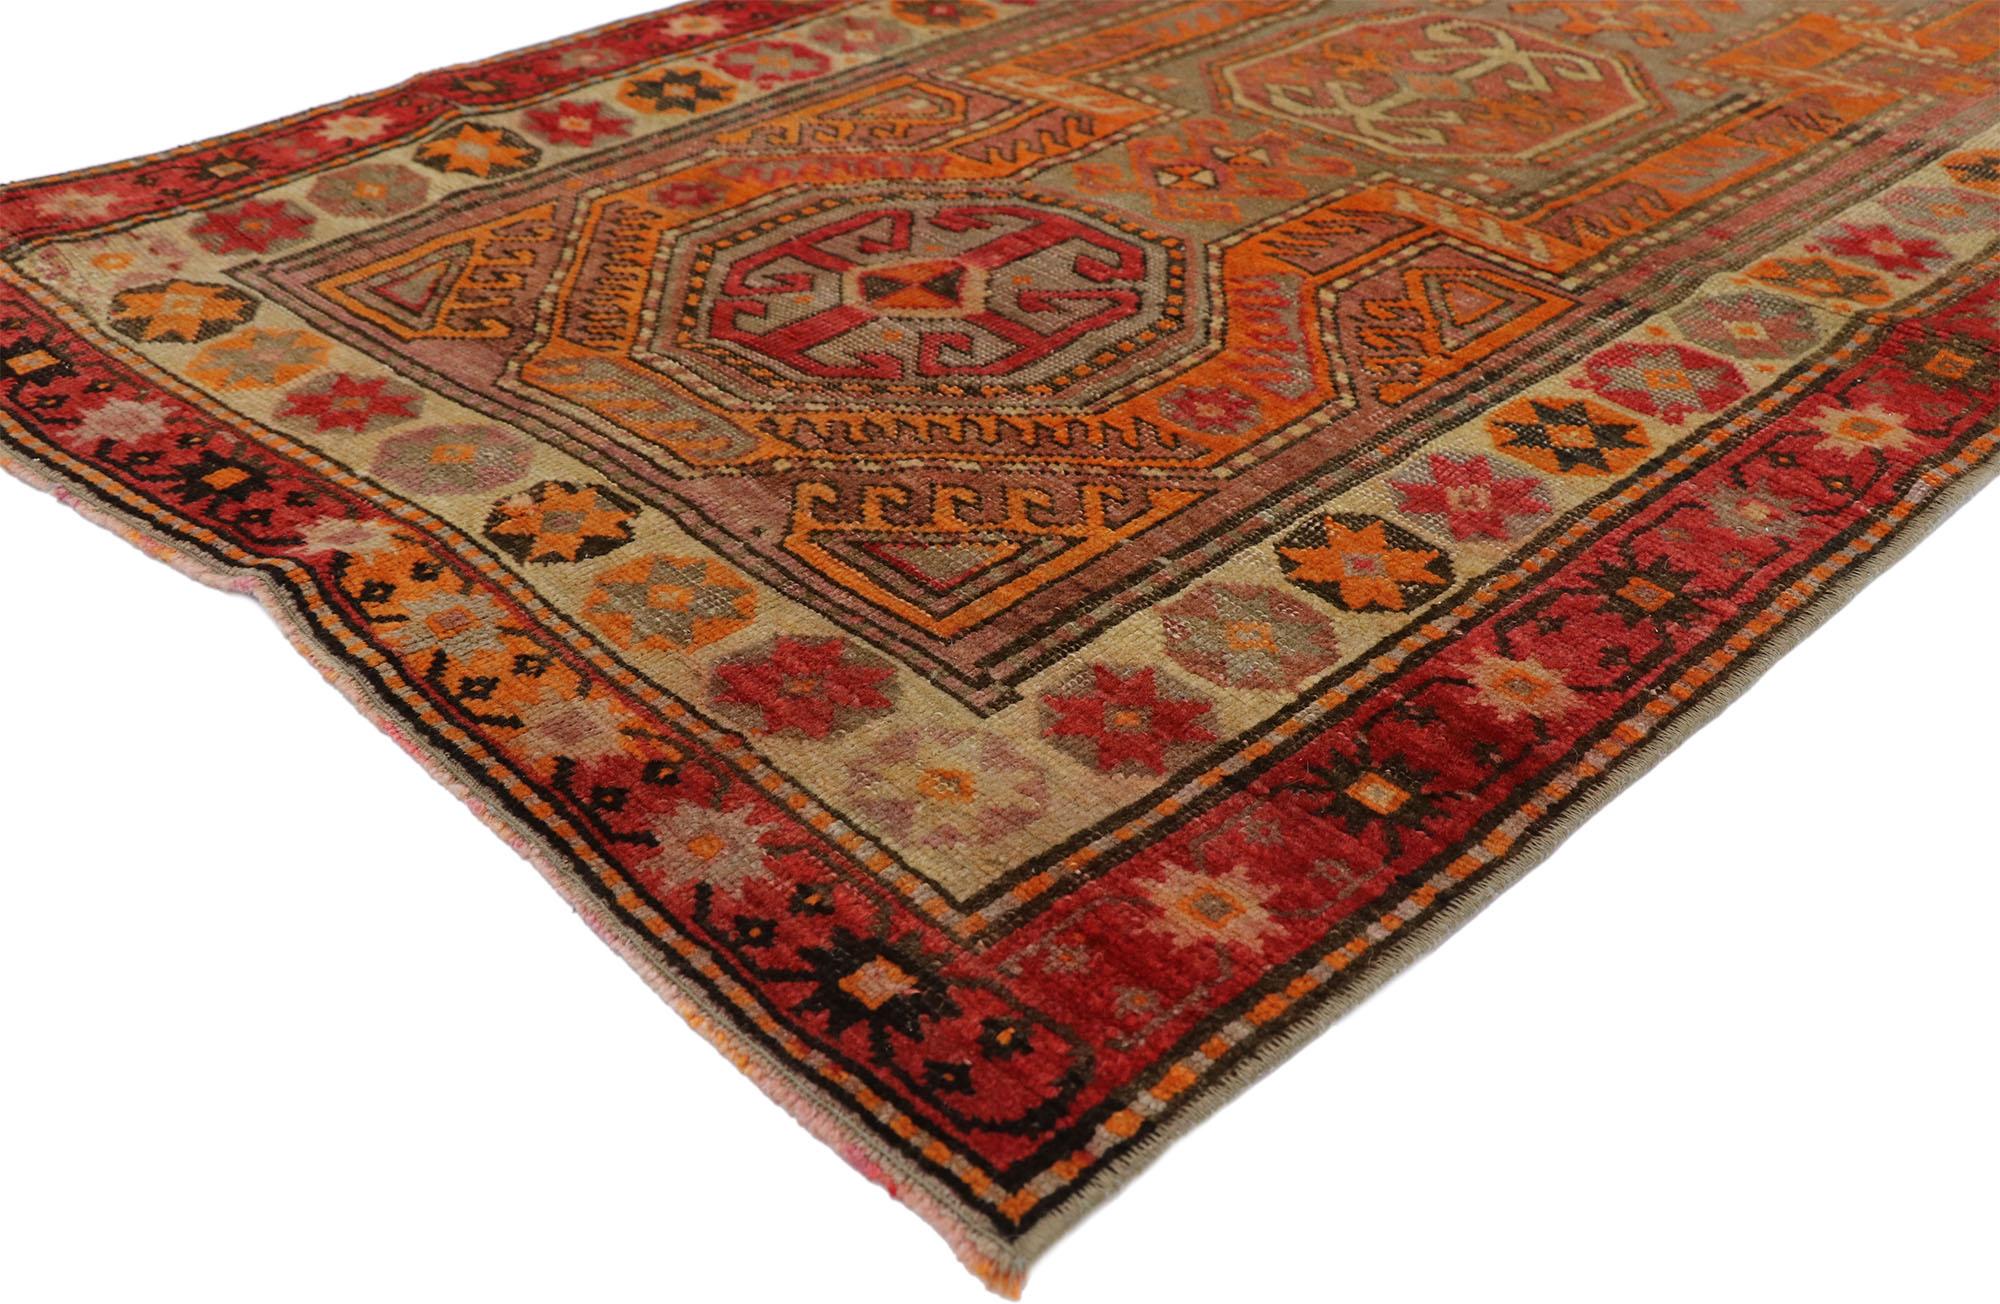 52614 Distressed Vintage Turkish Oushak Runner with Modern Rustic Northwestern Style 03'03 x 07'11. With its bold hues and rugged beauty, this hand-knotted wool distressed vintage Turkish runner beautifully embodies a modern rustic northwestern